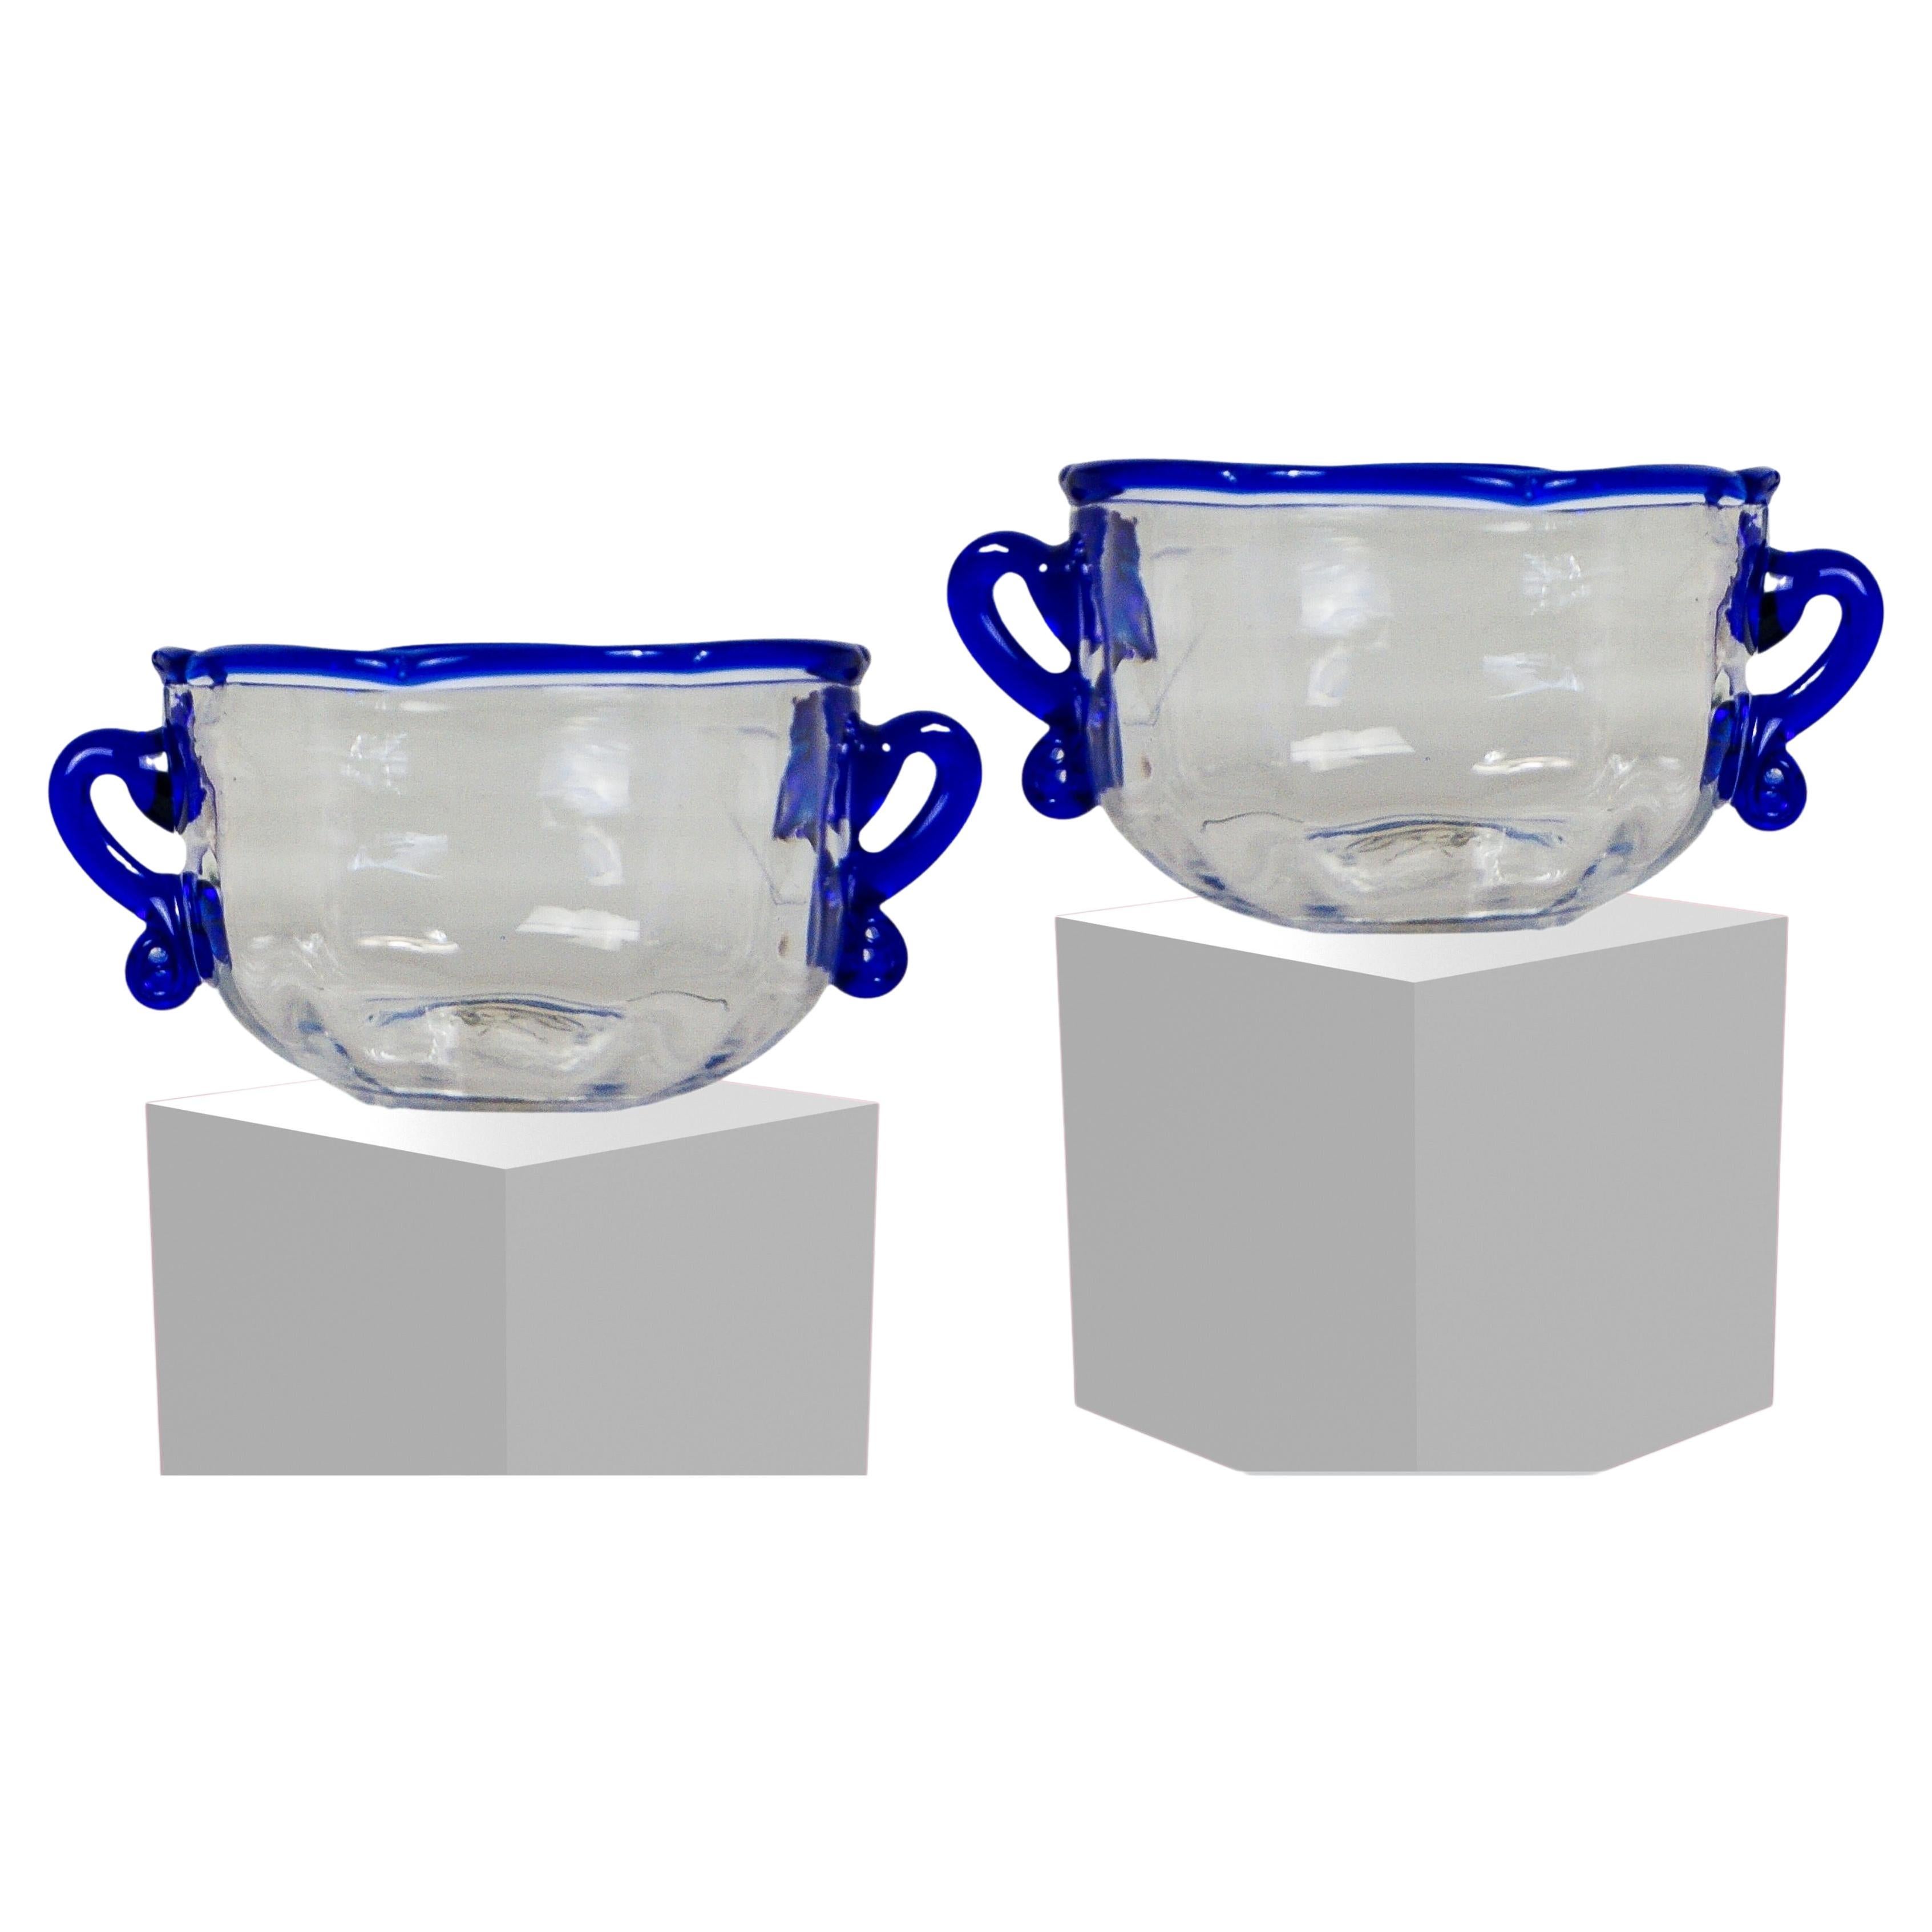 Set of 2 matching antique British Georgian Wrythen glass bowls.
Dating from the turn of the late 18th /early 19th century, circa 1800.
Textured ribbed clear glass with appliqué blue rim and double blue handles.
Substantially sized, they are larger